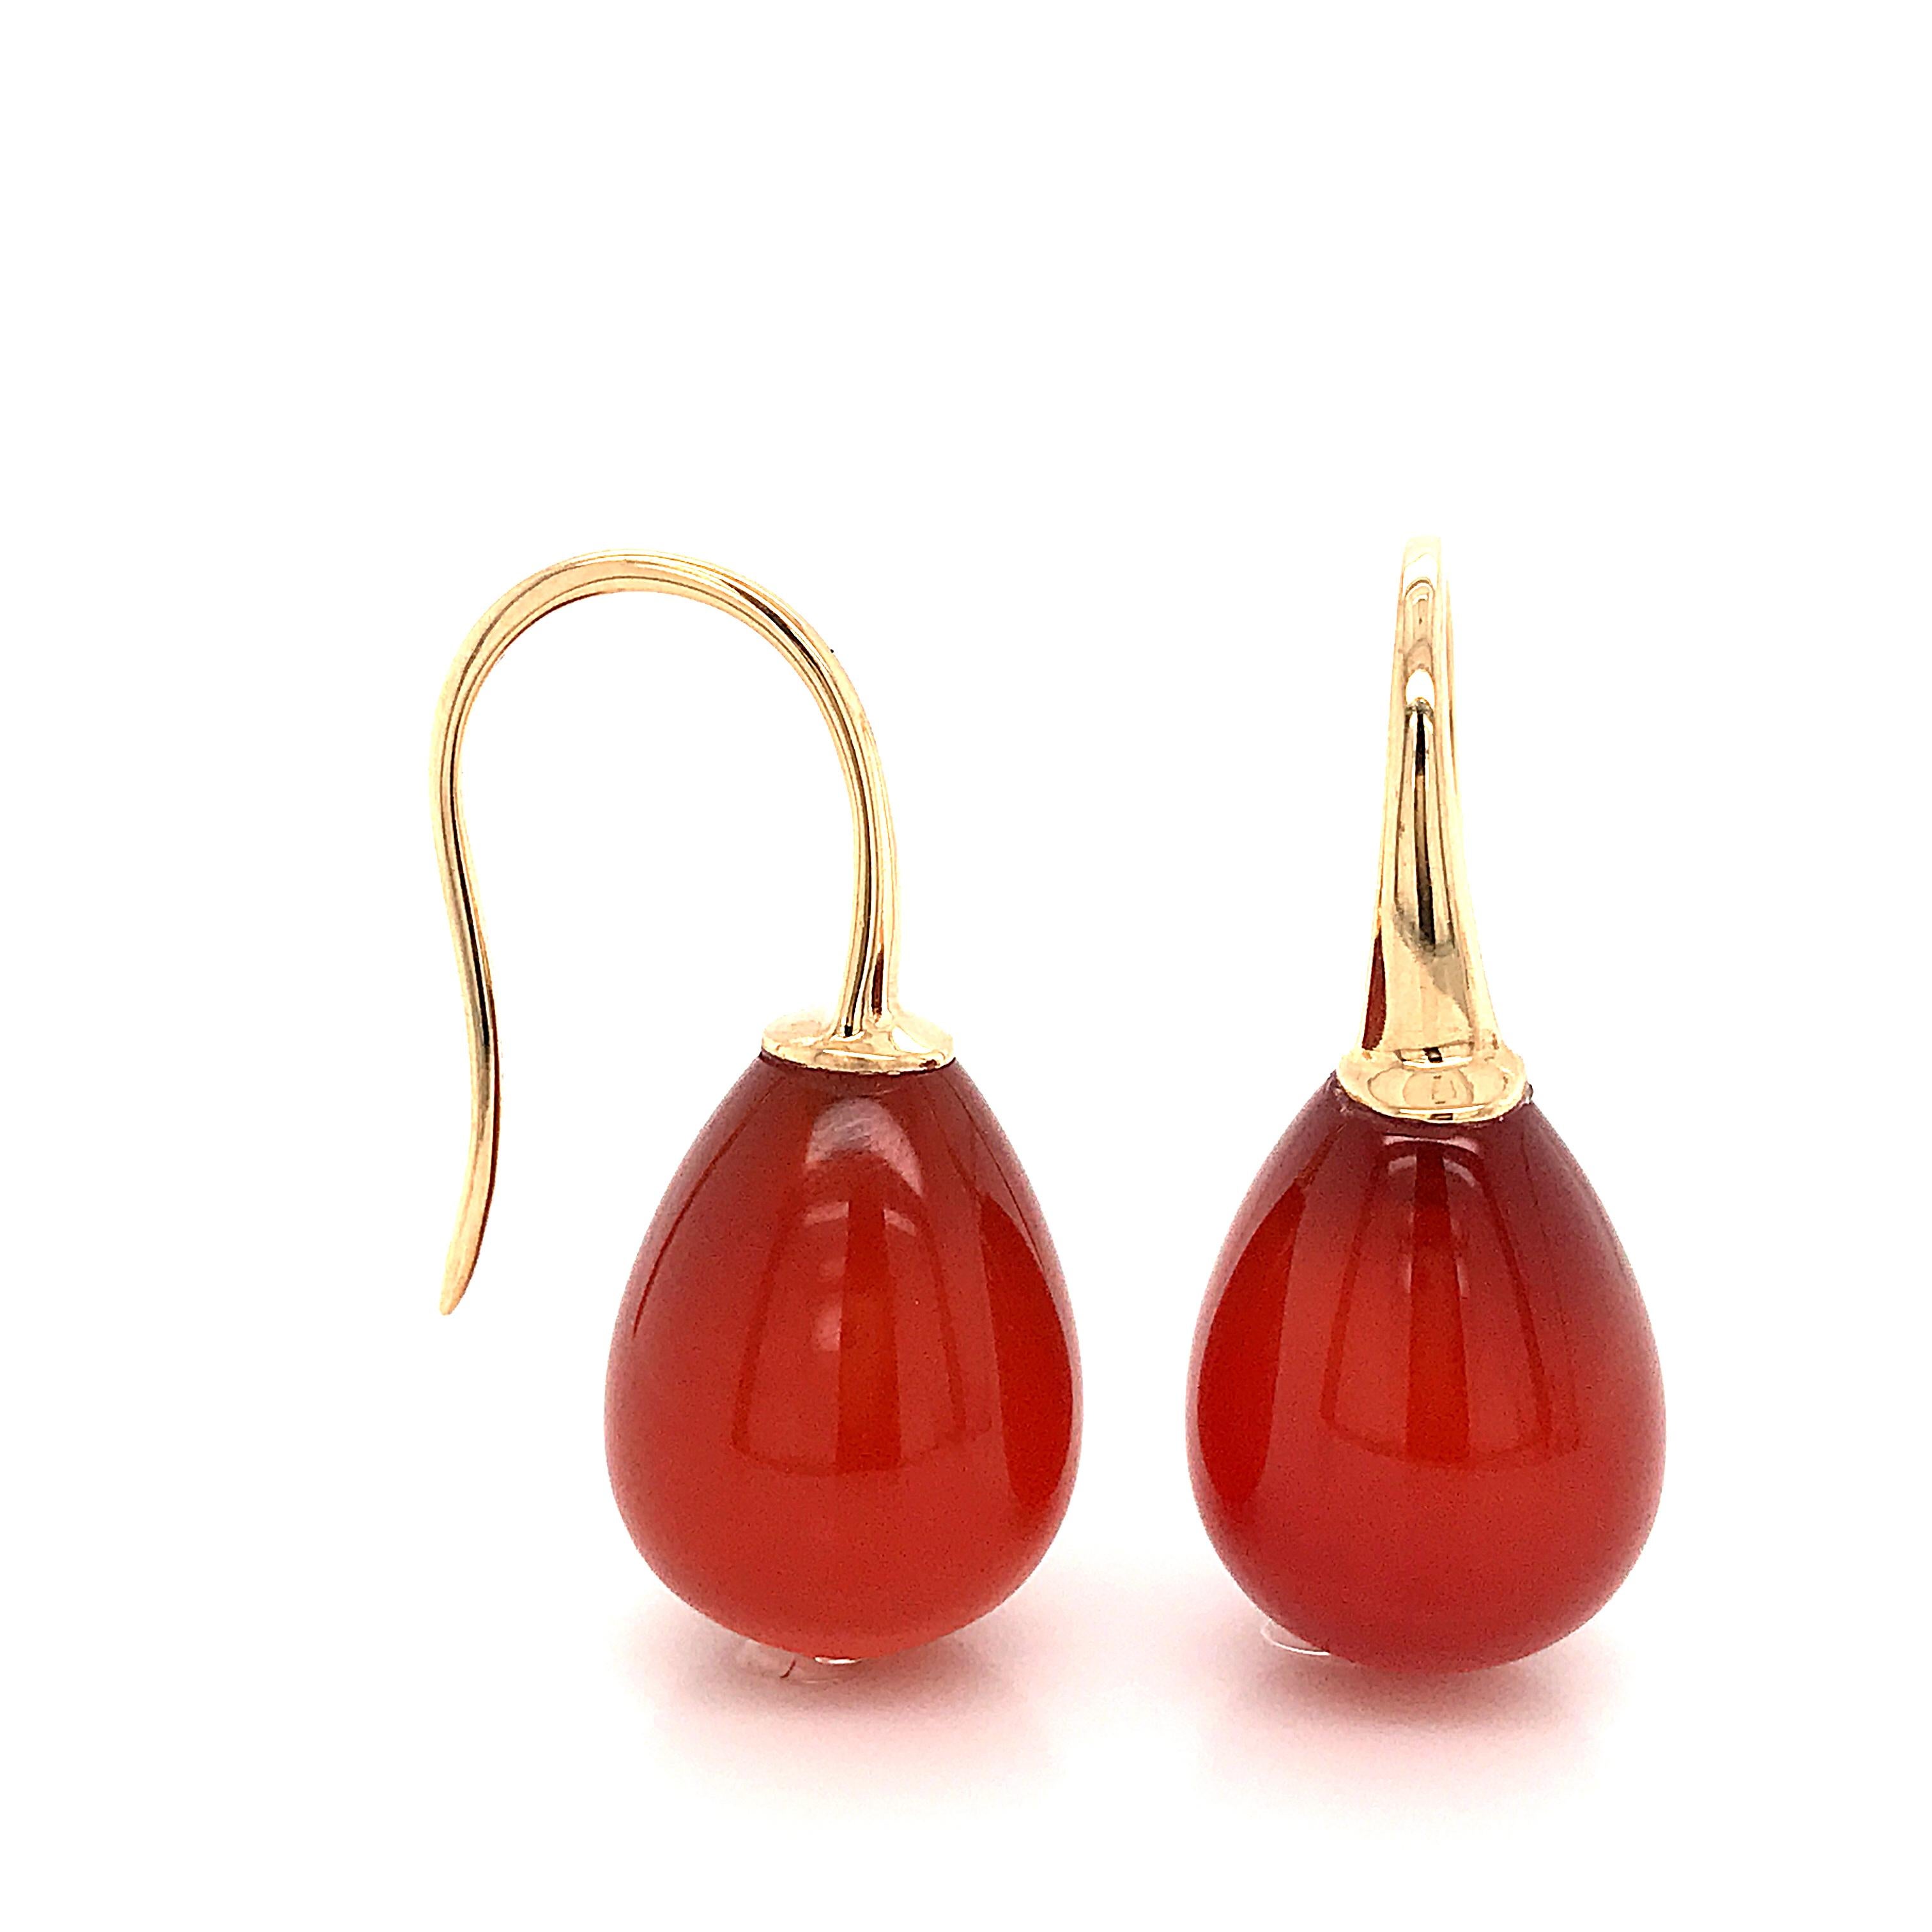 Red Agathe and Yellow Gold Drop Earrings
Hydro Red Agathe 
Yellow Gold 18K weight 2 grams 